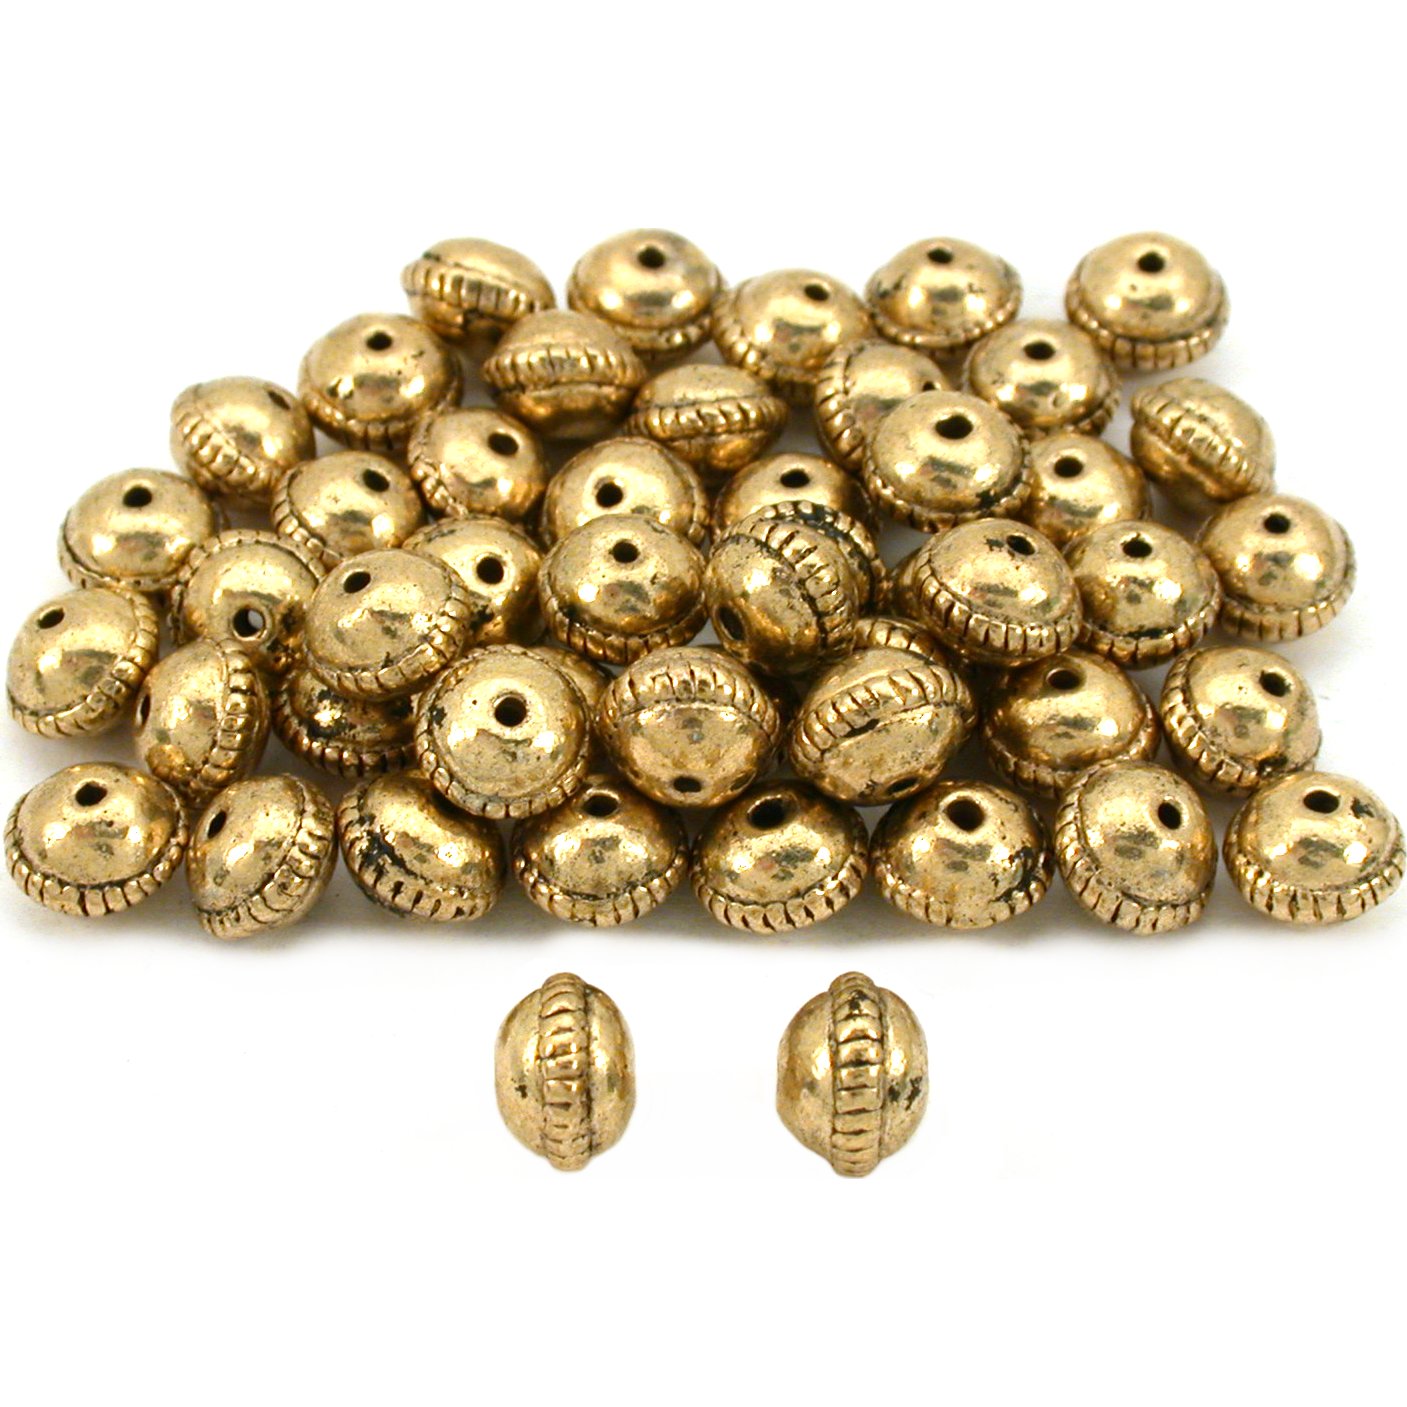 Bali Saucer Antique Gold Plated Beads 8.5mm 50Pcs Approx.